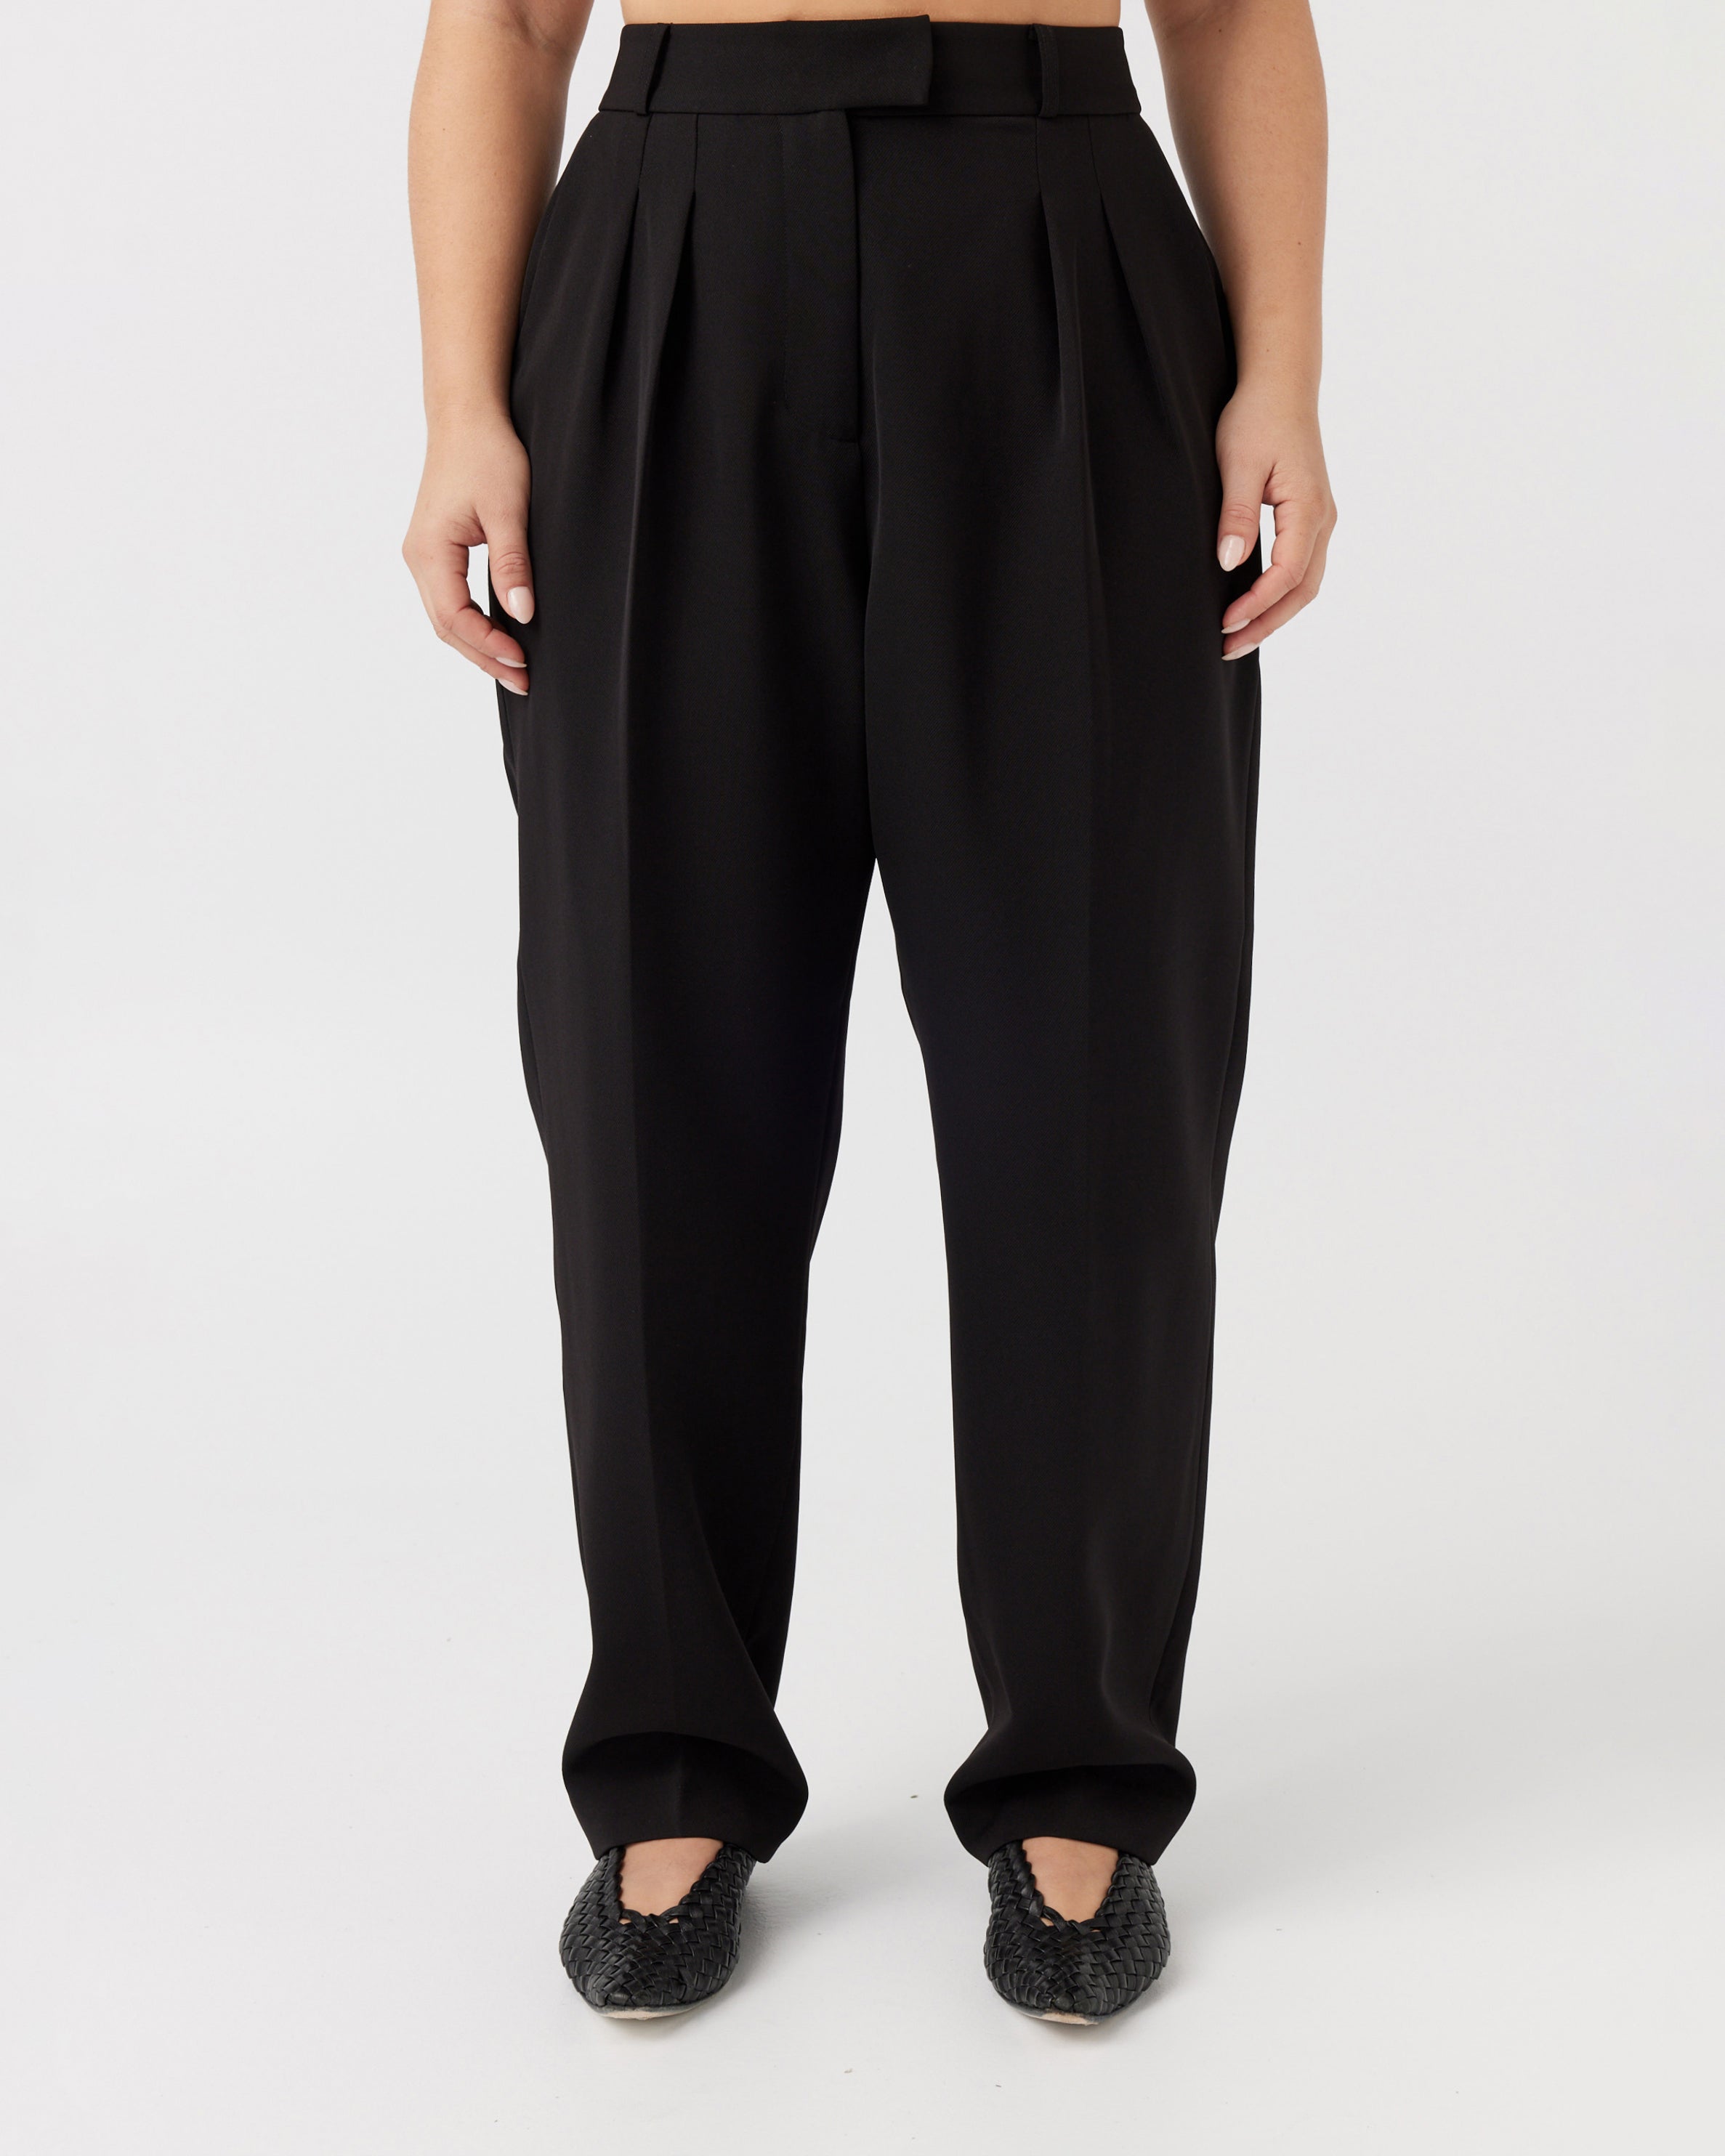 Topshop high waist balloon peg pants in washed black - ShopStyle